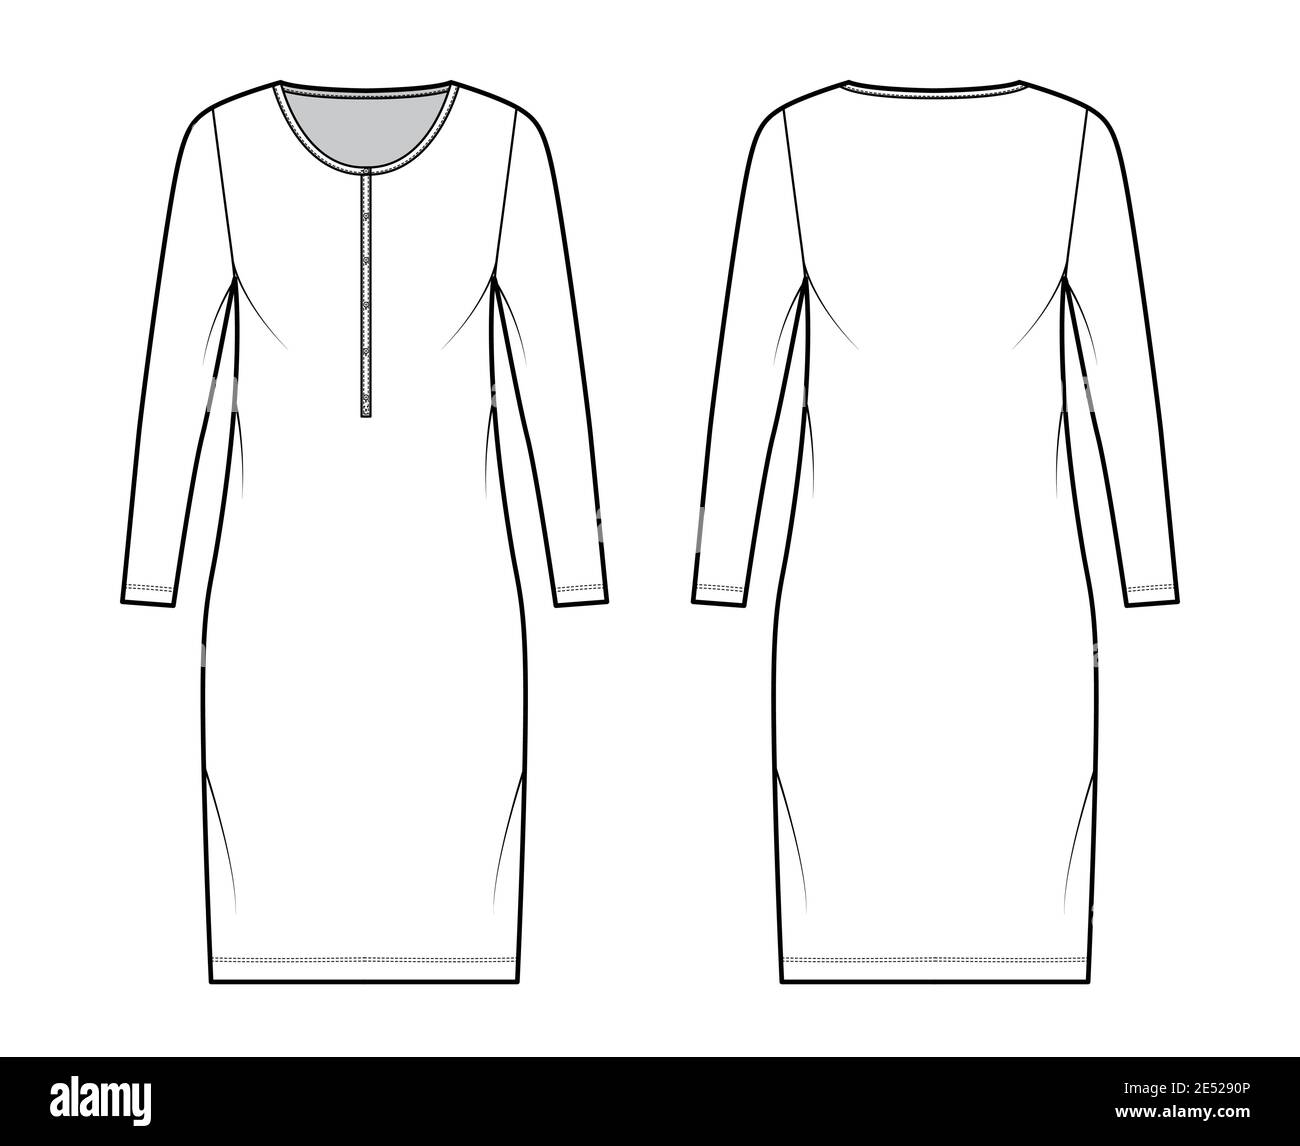 Shirt dress technical fashion illustration with henley neck, long sleeves, knee length, oversized, Pencil fullness. Flat apparel template front, back, white color. Women, men, unisex CAD mockup Stock Vector